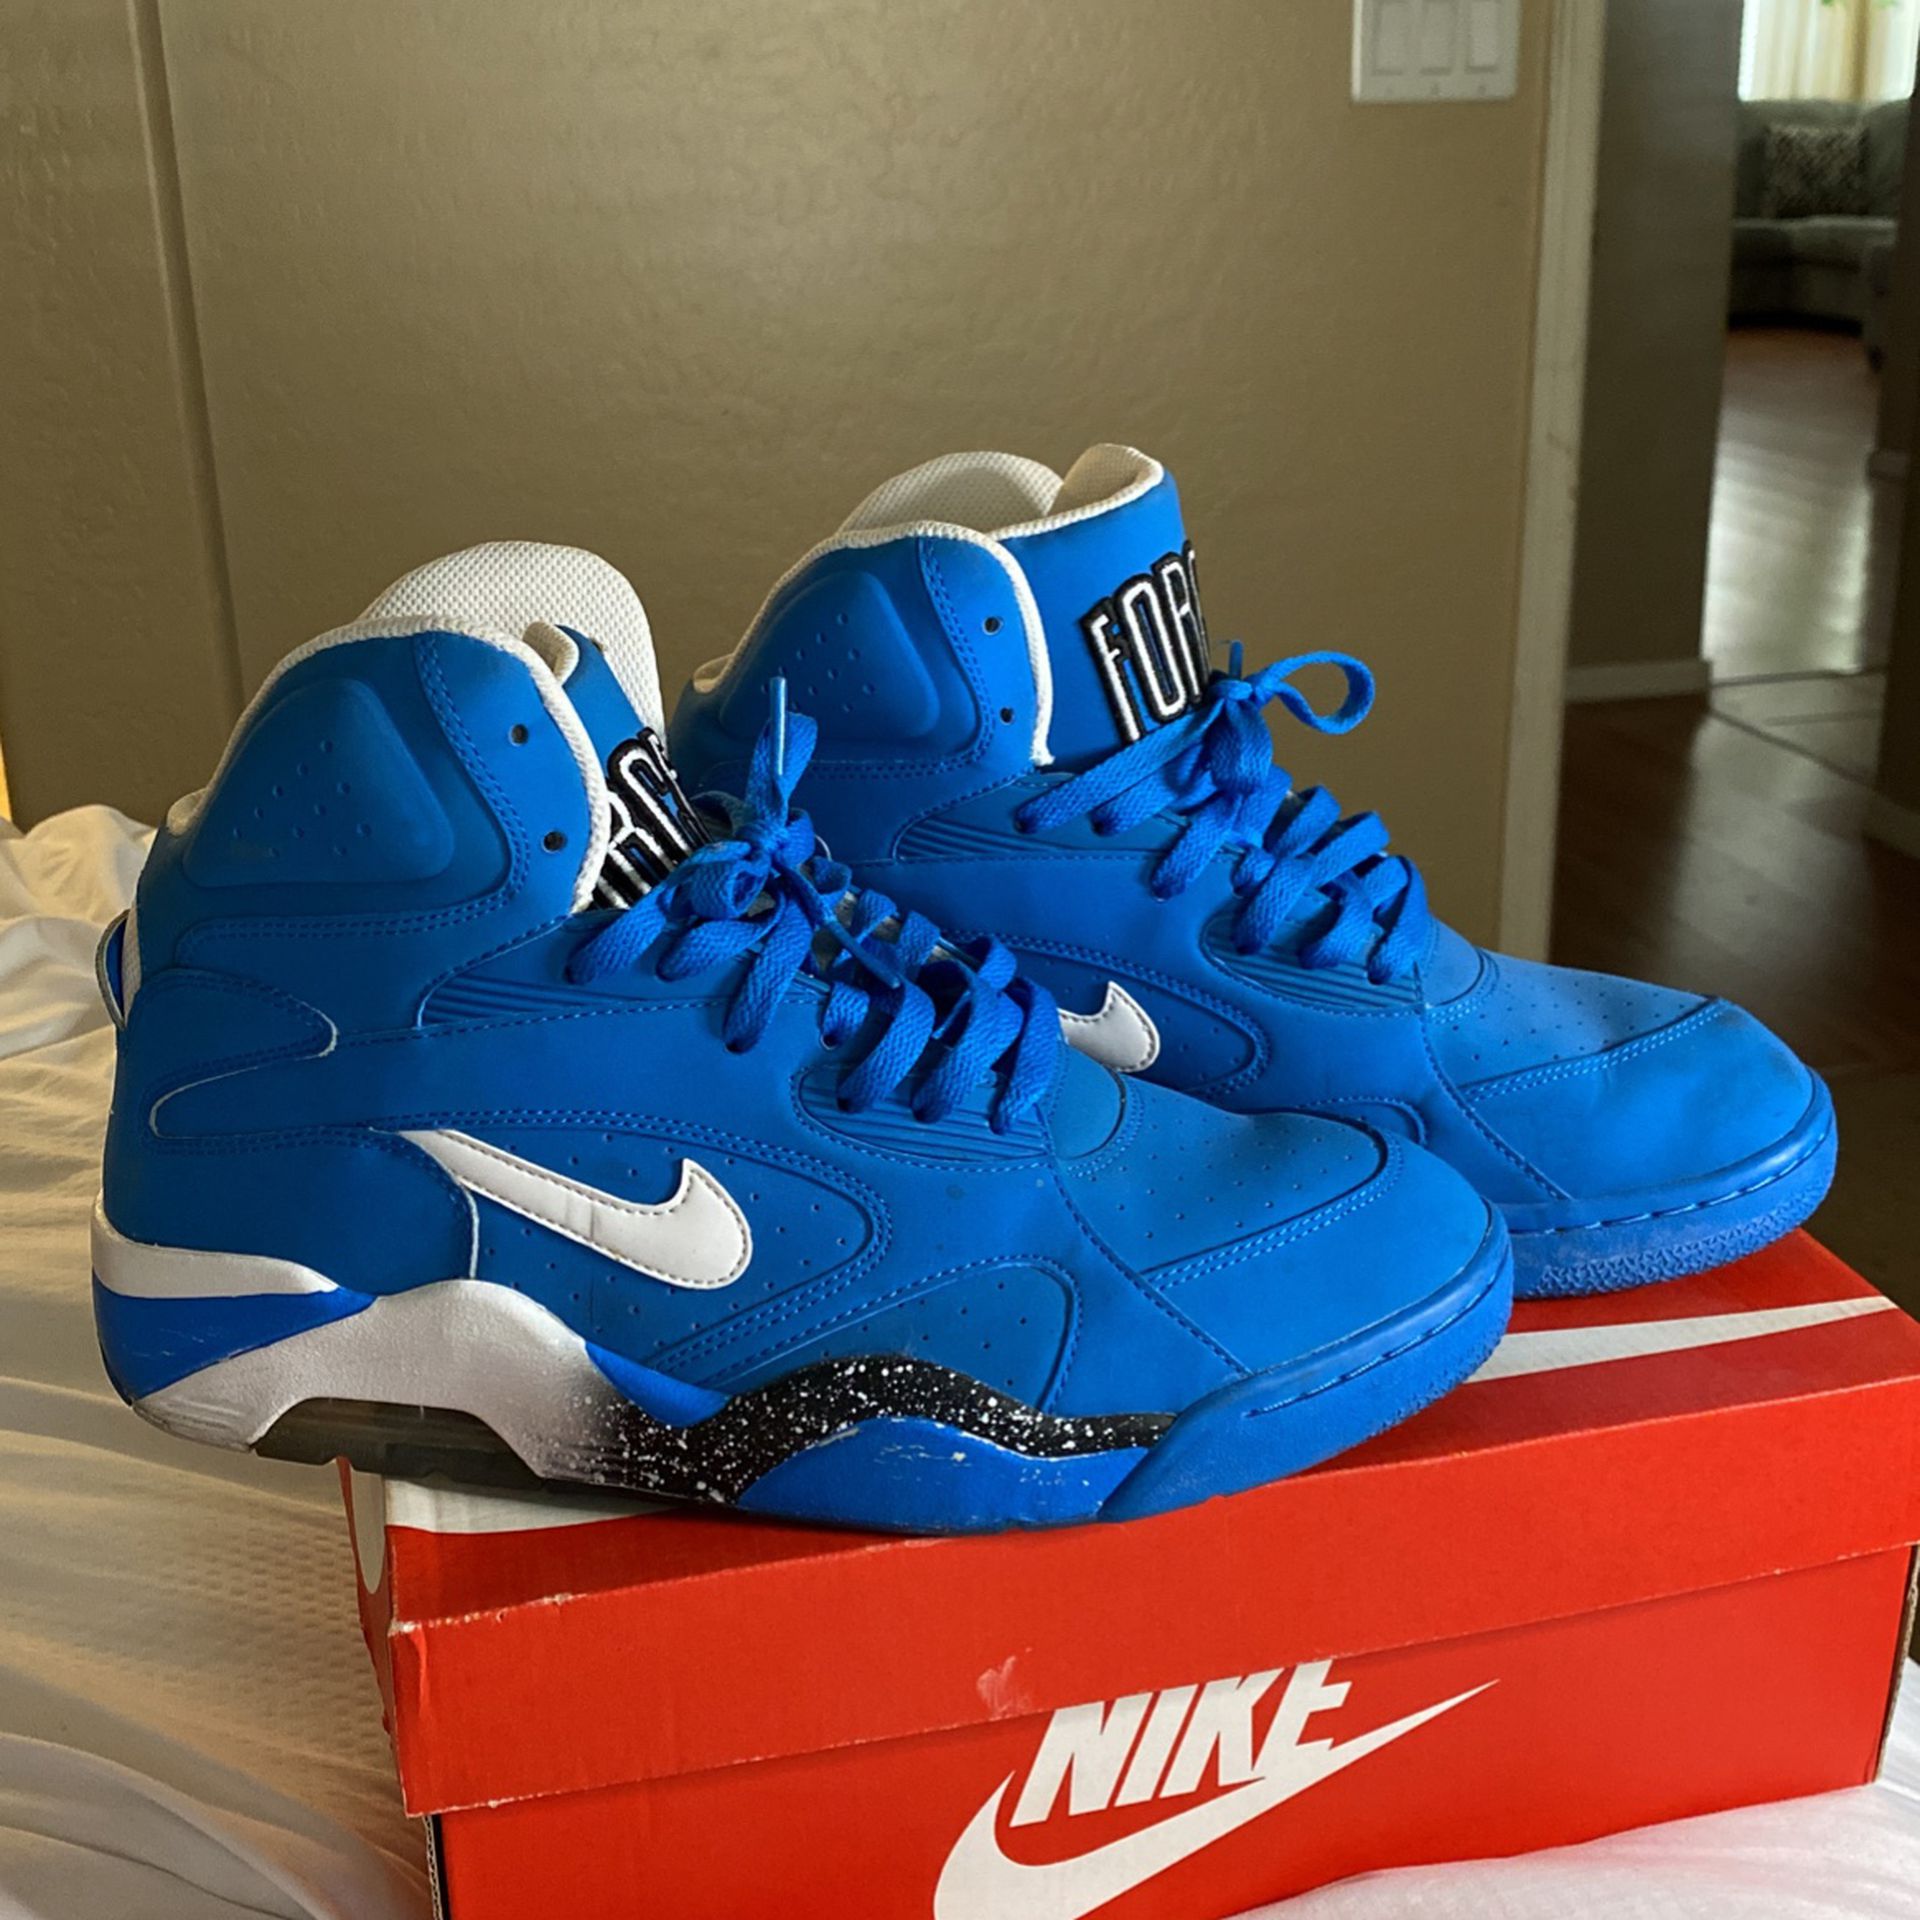 Nike Air Force 180 High for Sale in Chandler, AZ - OfferUp